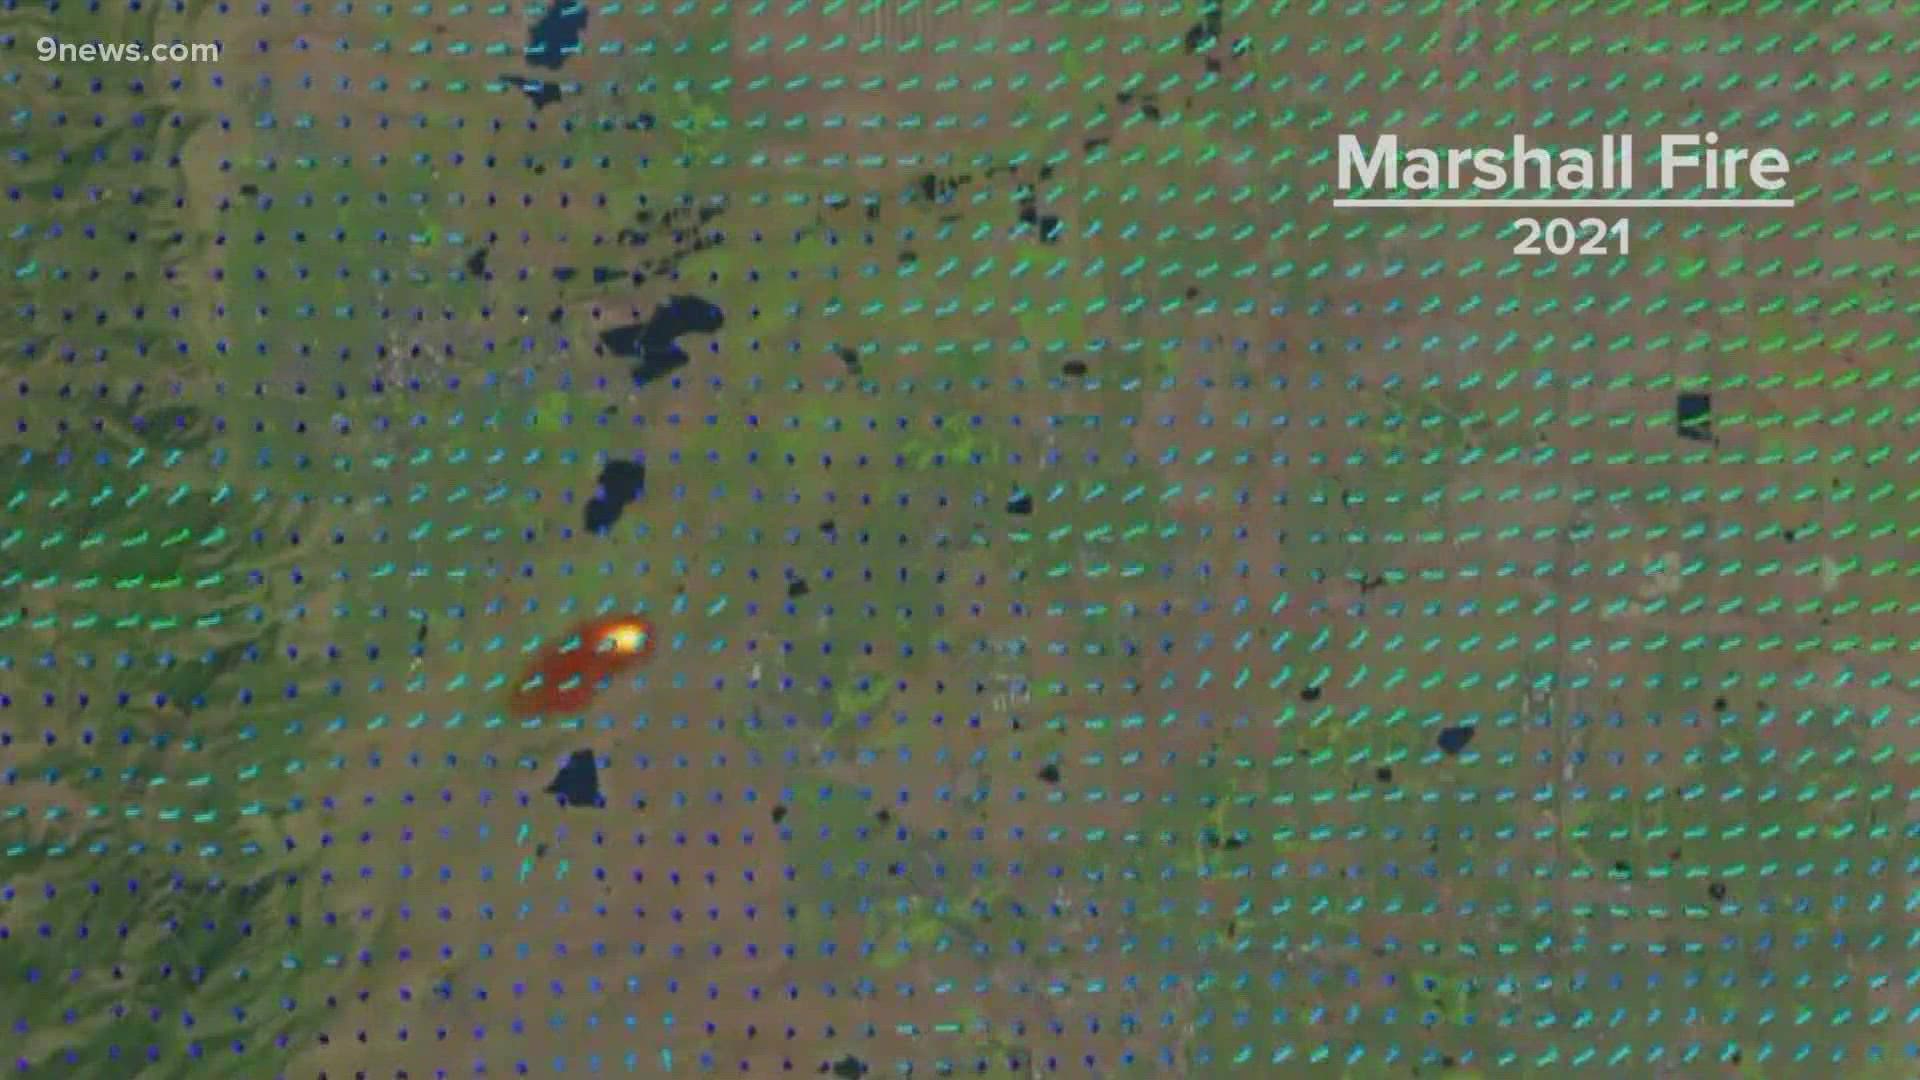 Janice Coen with the National Center for Atmospheric Research most recently developed a simulation of the Marshall Fire.